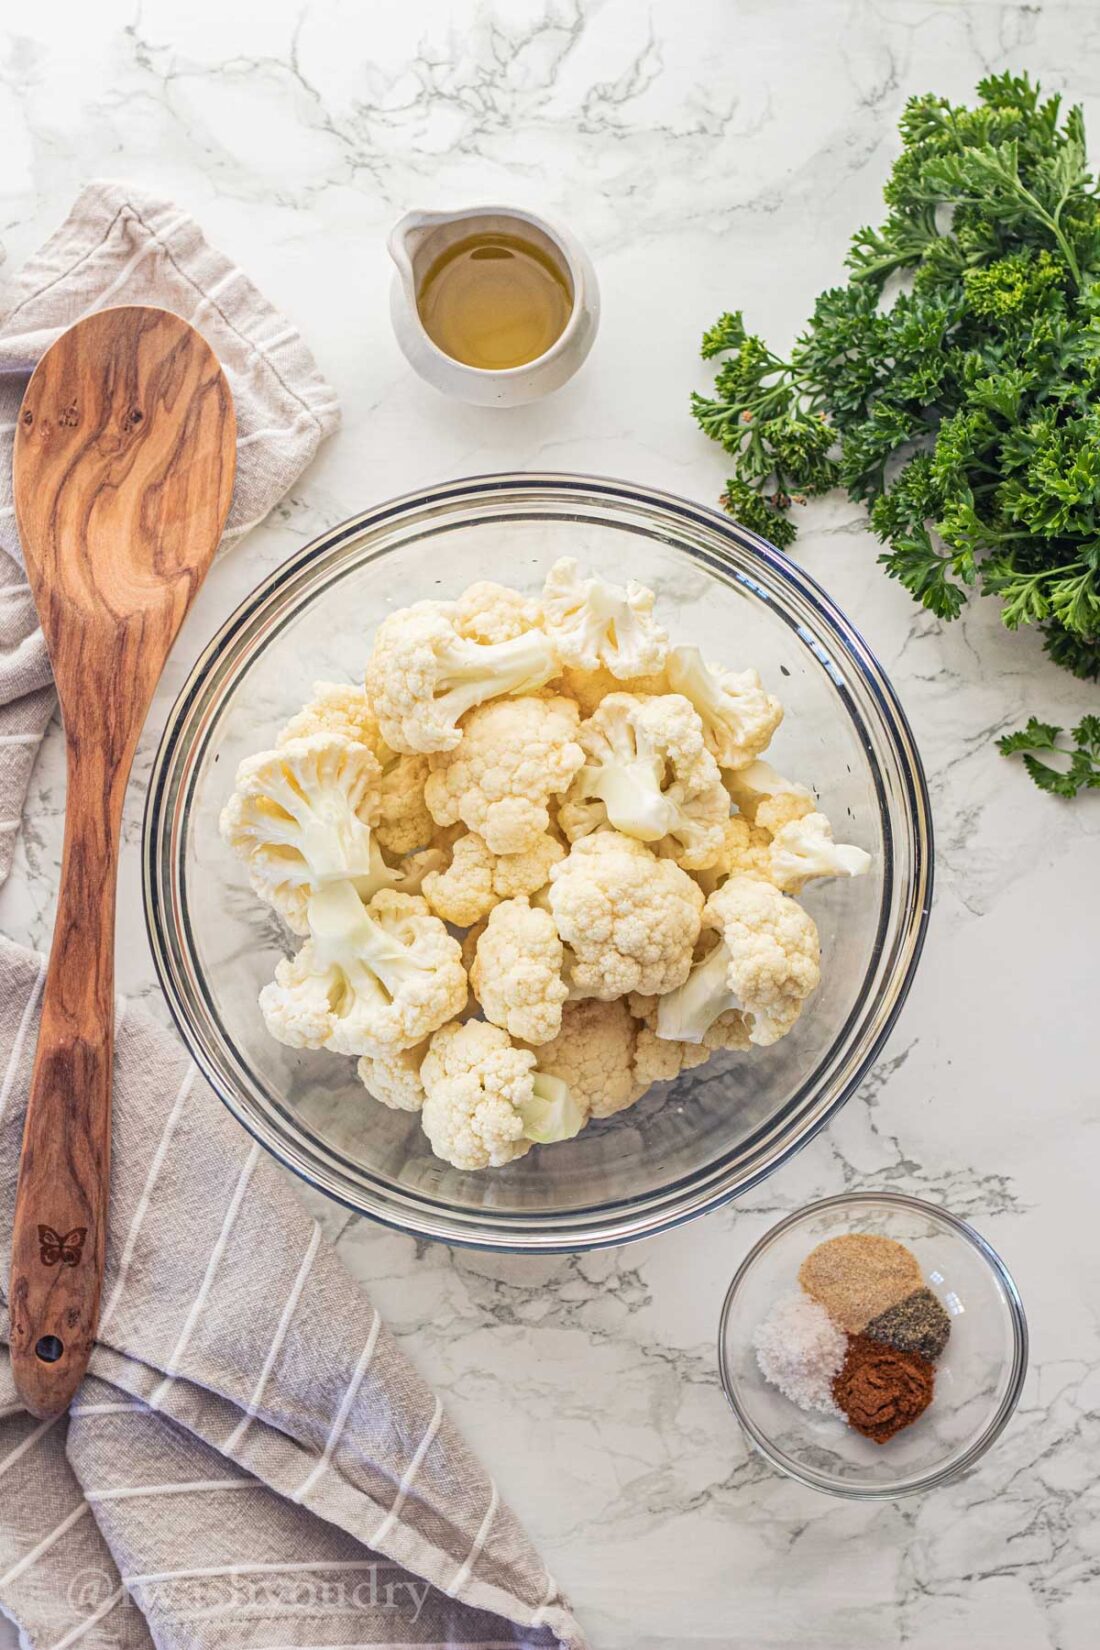 Chopped cauliflower florets, olive oil, and spices in glass bowls with wooden spoon. 